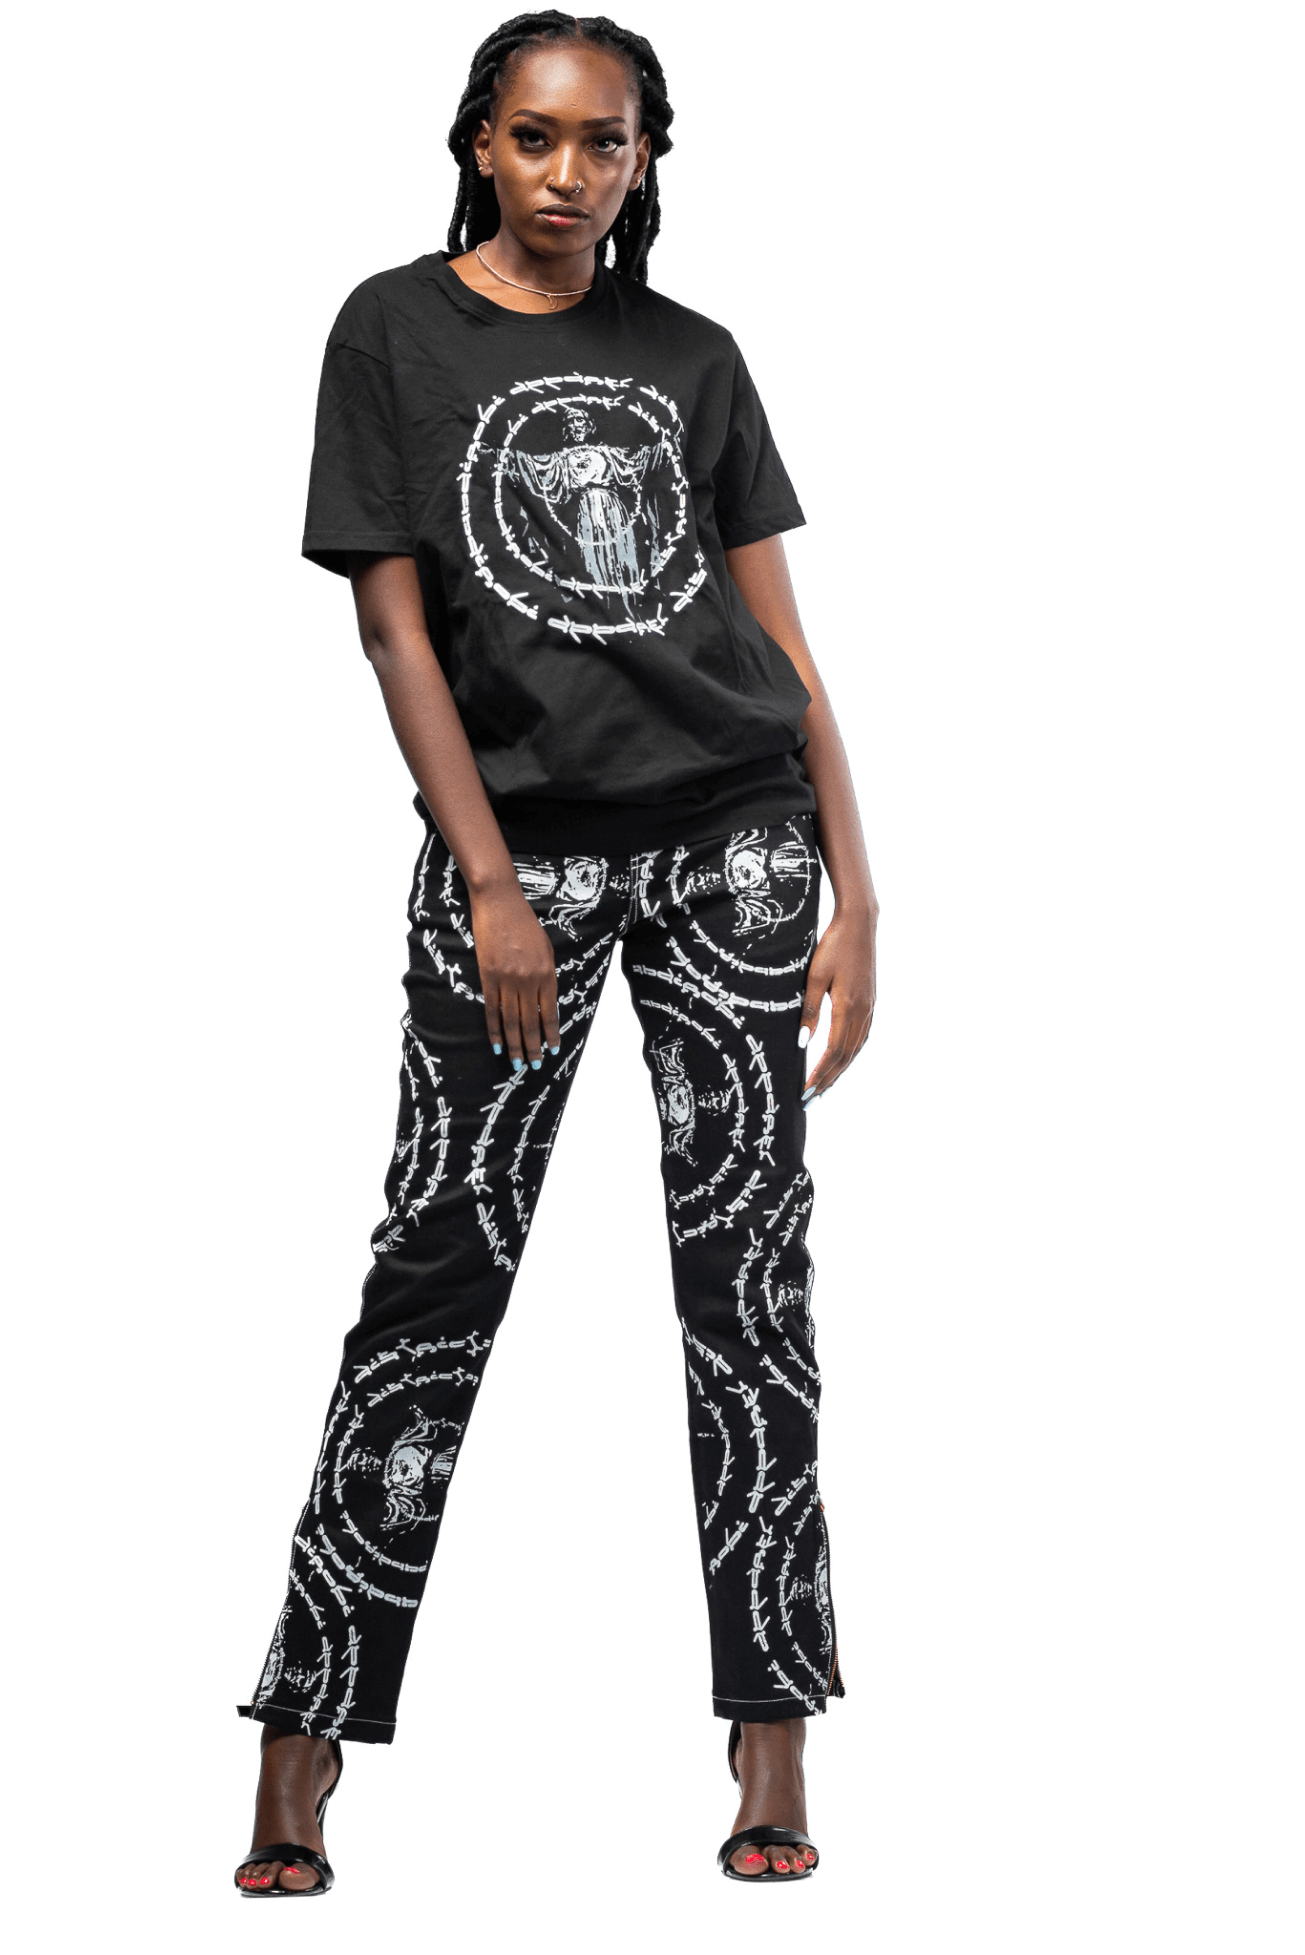 Shop JC Full Circle Black Printed T-Shirt by Nairobi Apparel District on Arrai. Discover stylish, affordable clothing, jewelry, handbags and unique handmade pieces from top Kenyan & African fashion brands prioritising sustainability and quality craftsmans